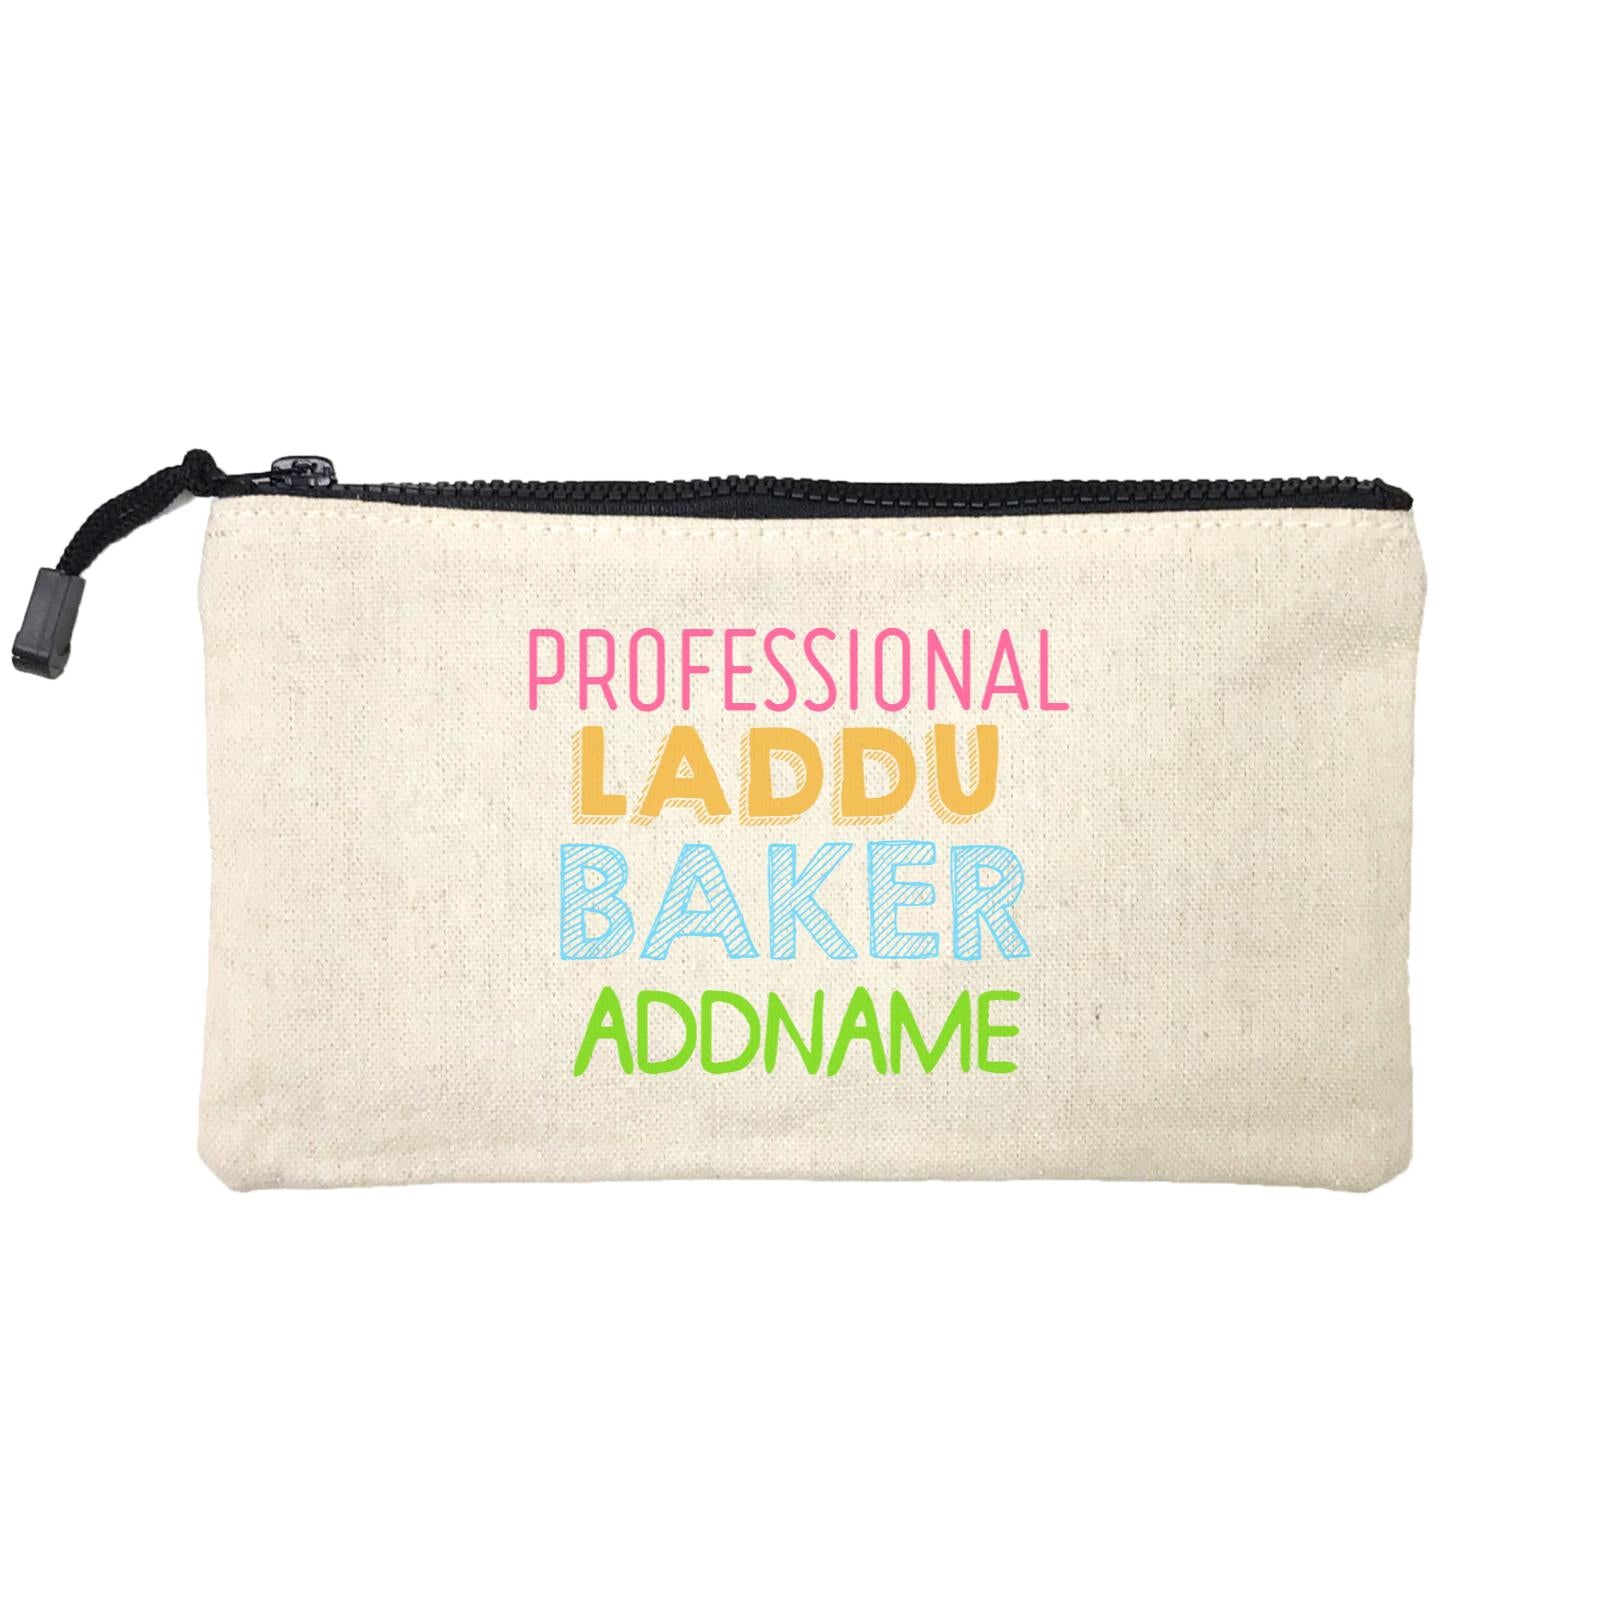 Professional Laddu Baker Addname Mini Accessories Stationery Pouch